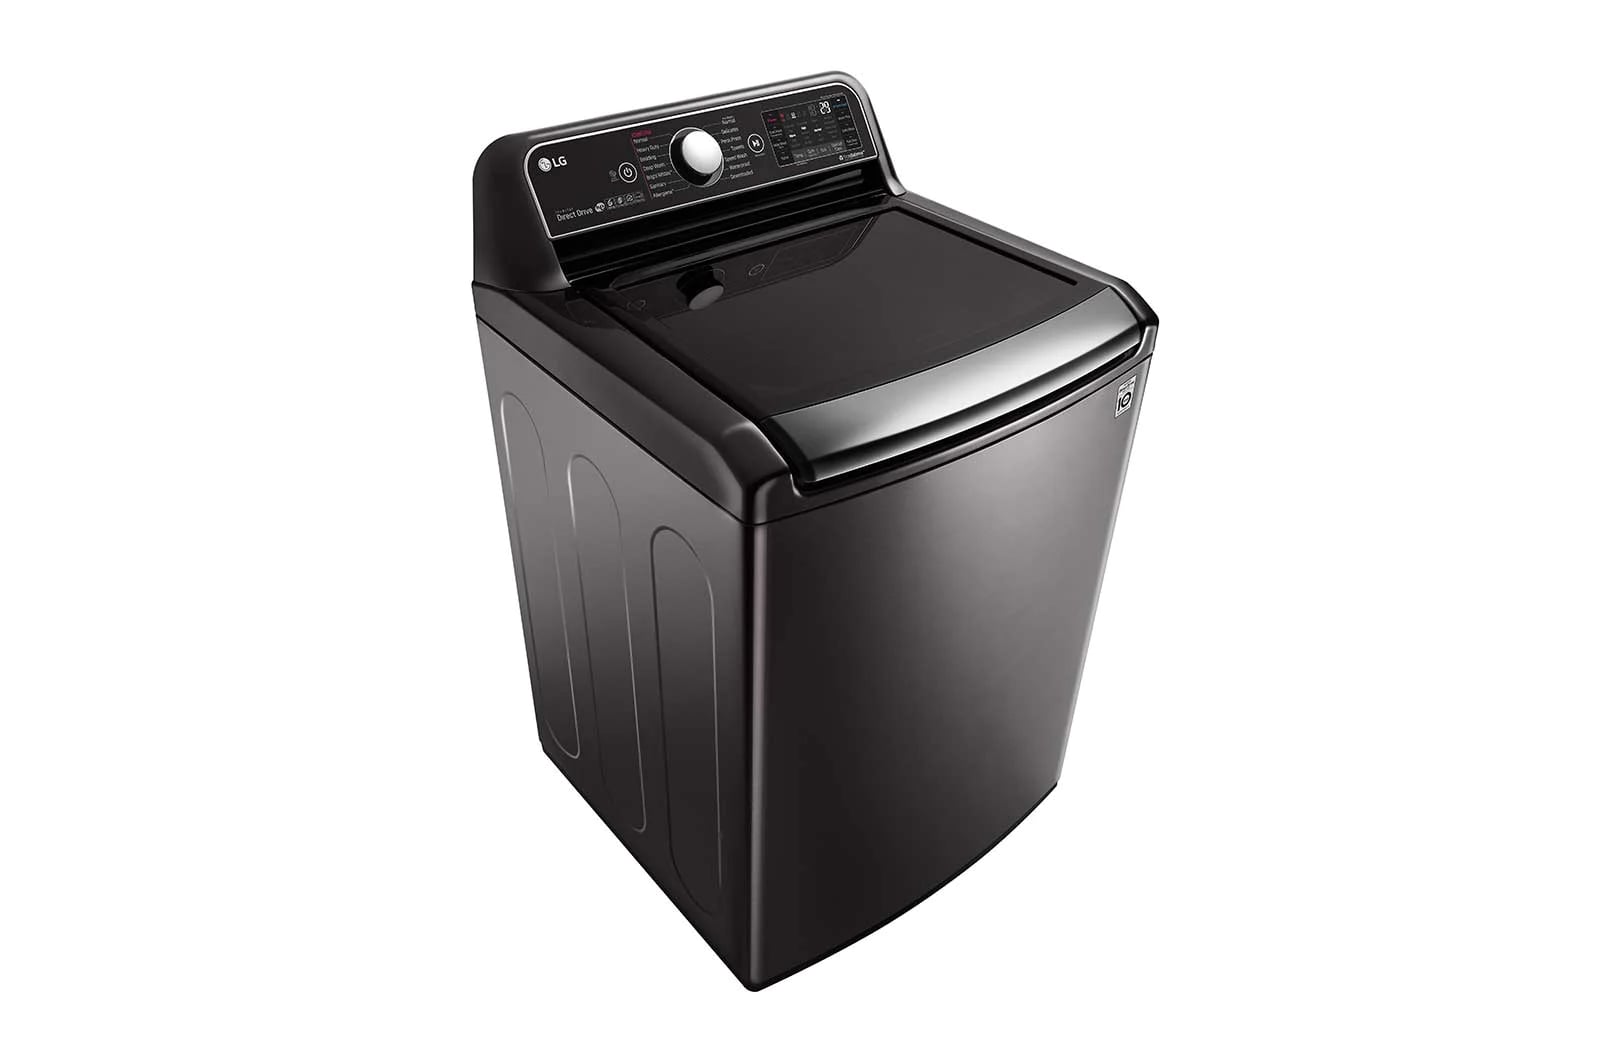 LG - 6.3 cu. Ft  Top Load Washer in Black Stainless - WT7900HBA